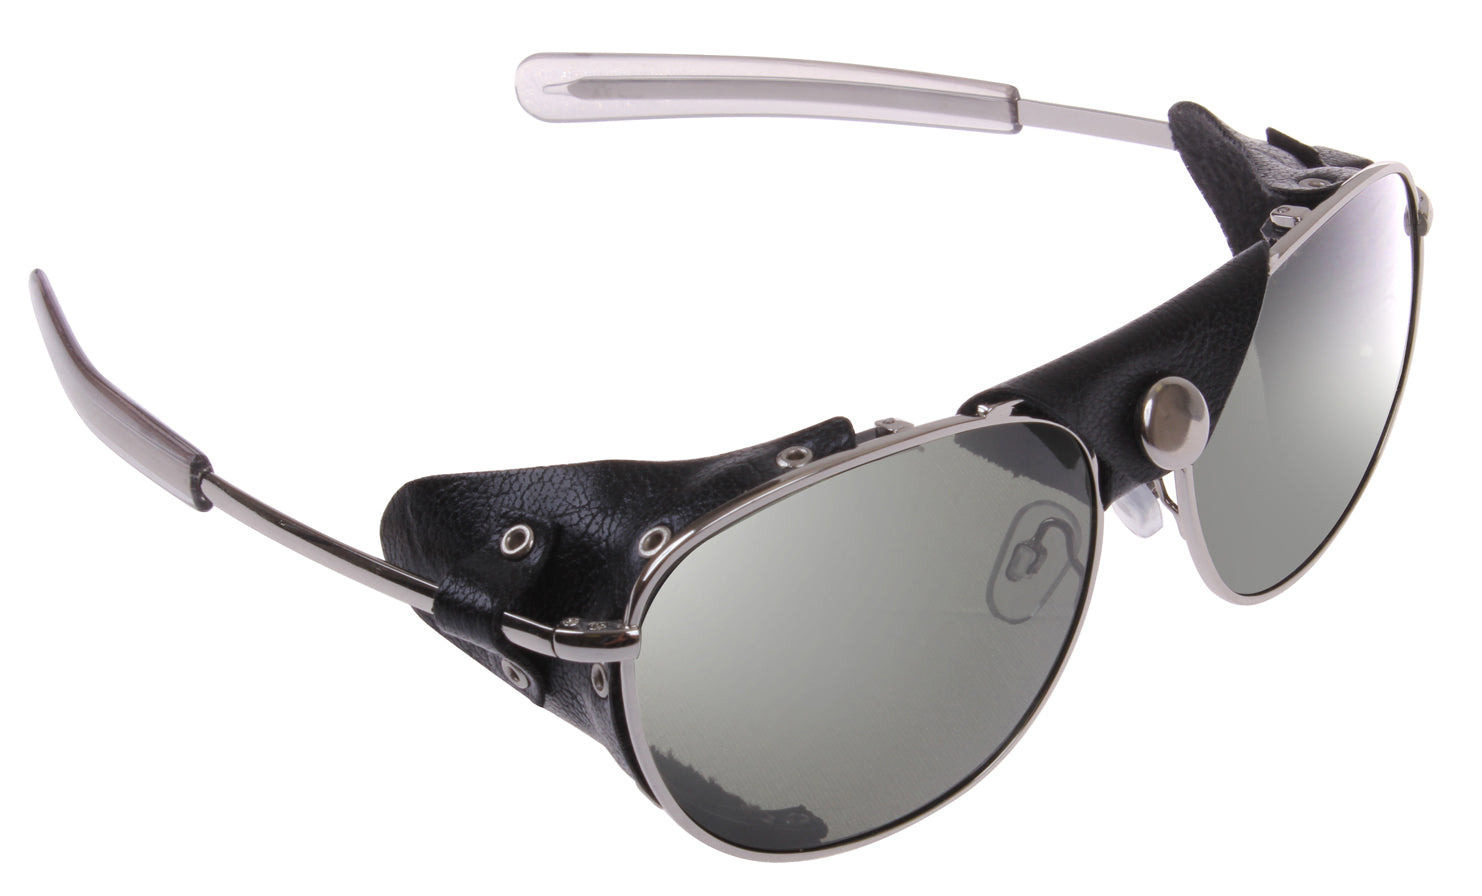 Rothco Tactical Aviator Sunglasses With Wind Guards - Tactical Choice Plus